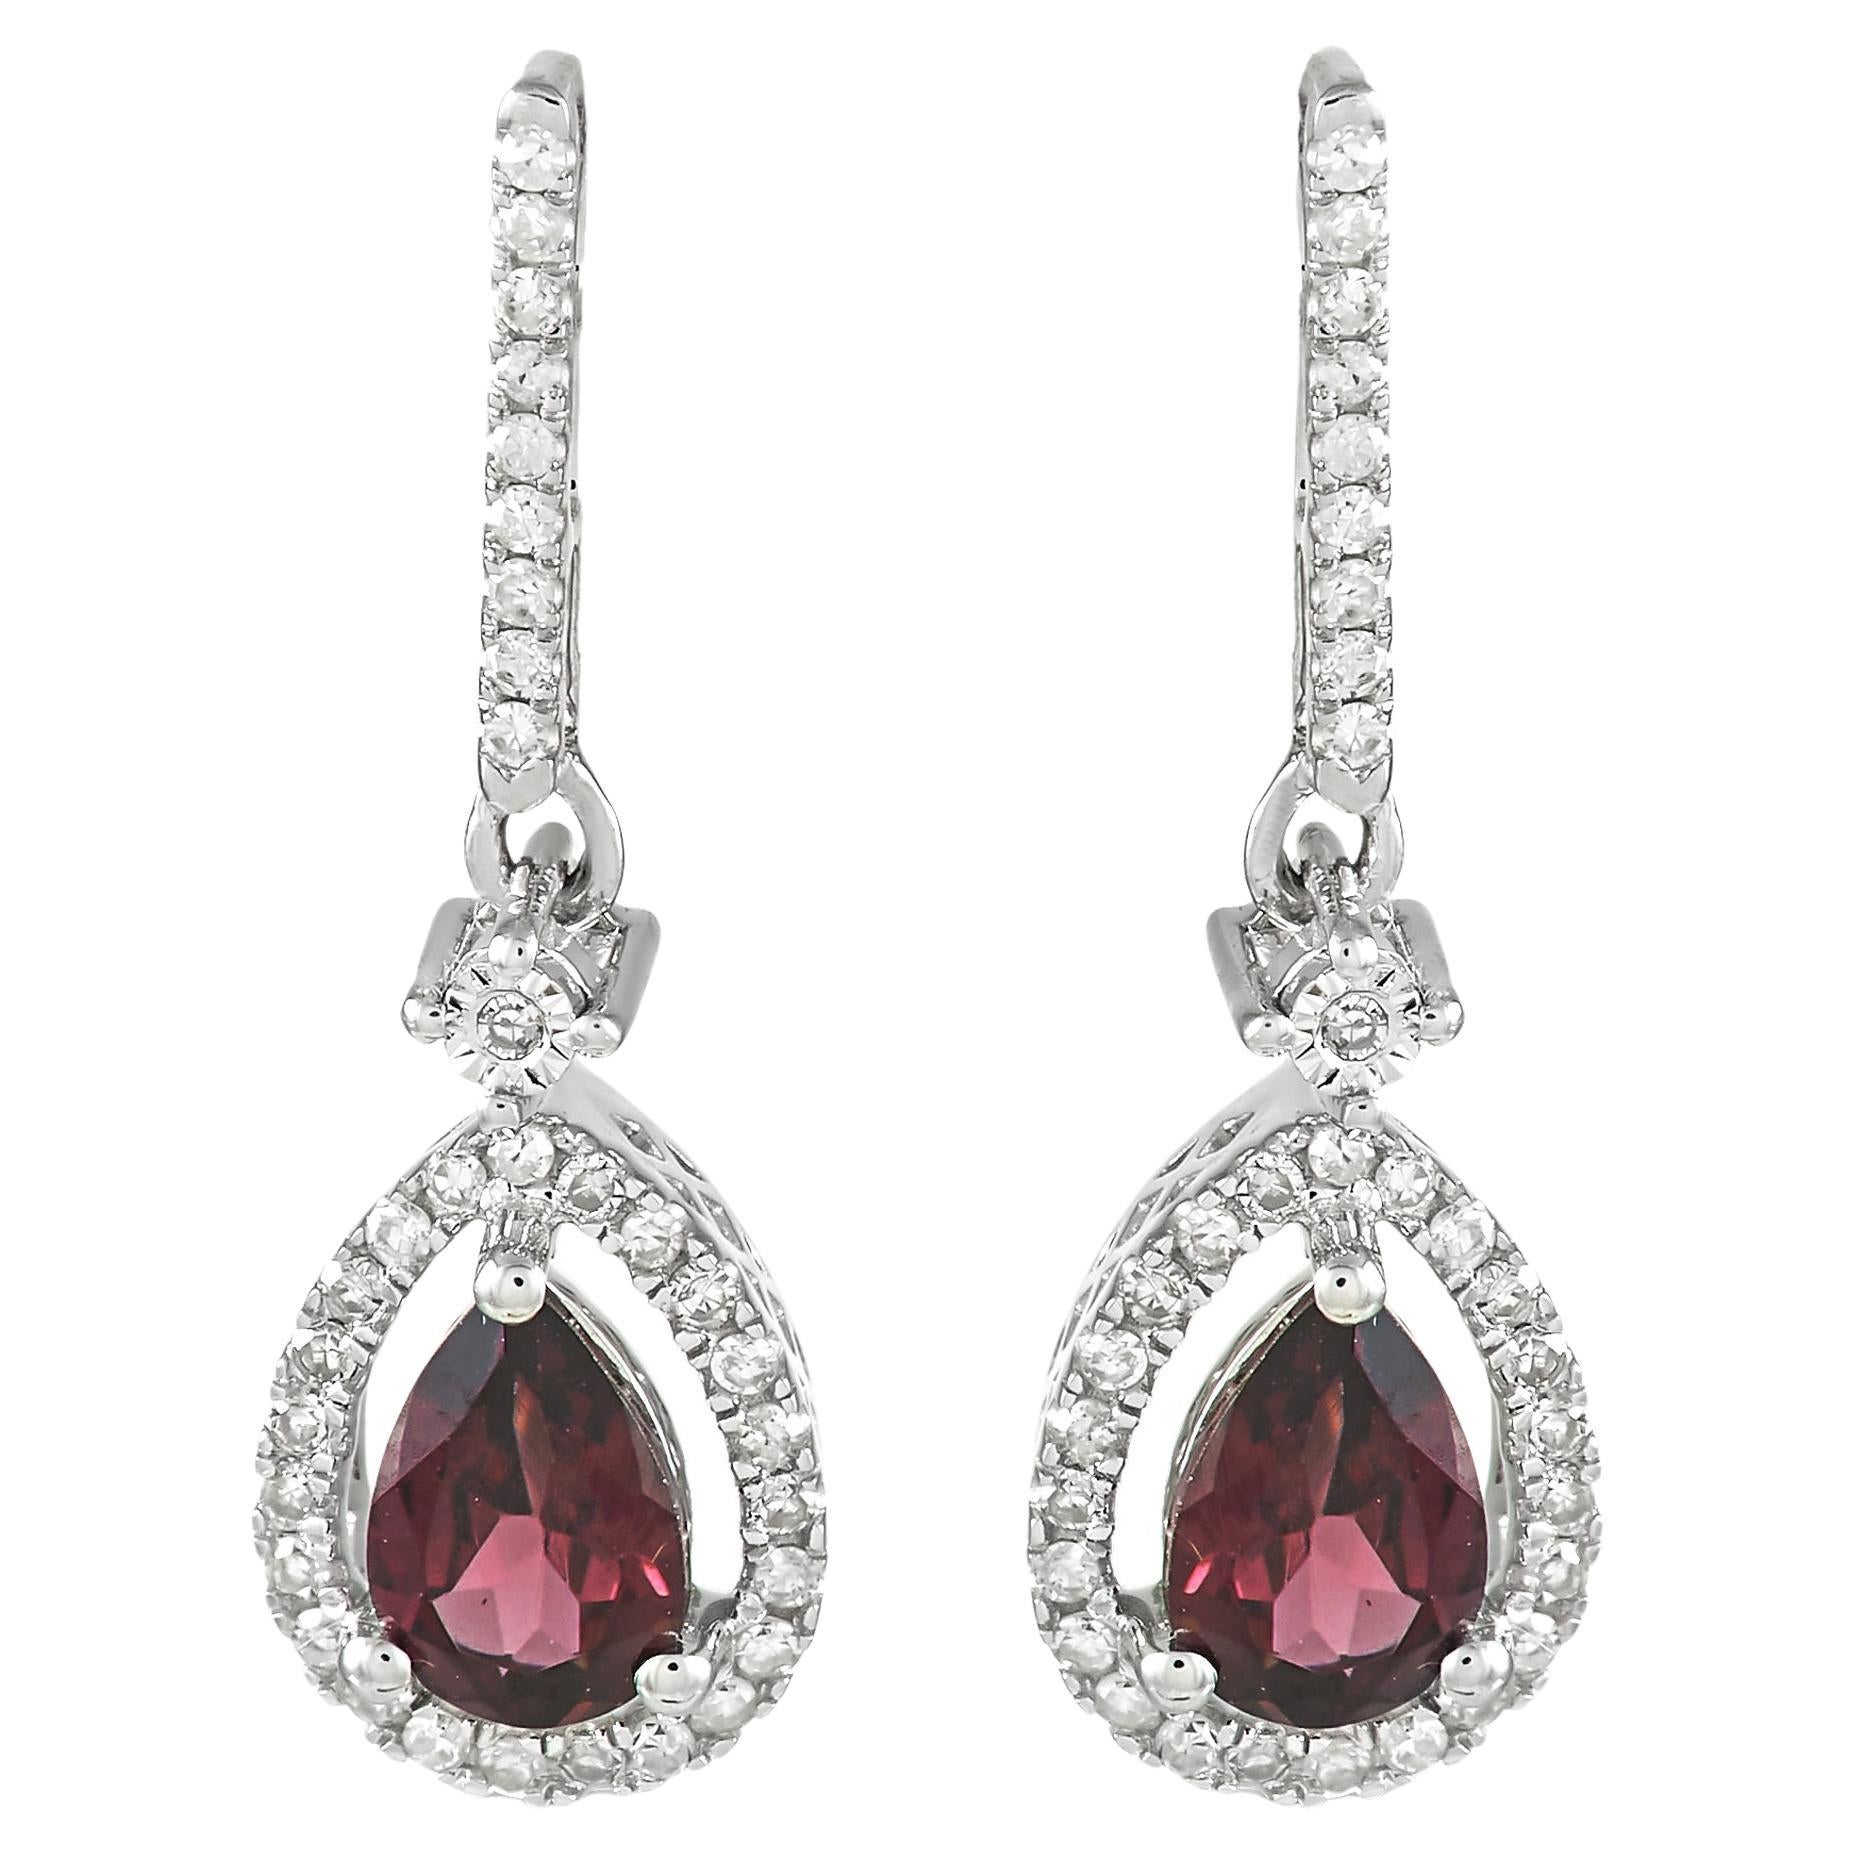 LB Exclusive 14K White Gold 0.20 Ct Diamond and Garnet Dangle Earrings For Sale